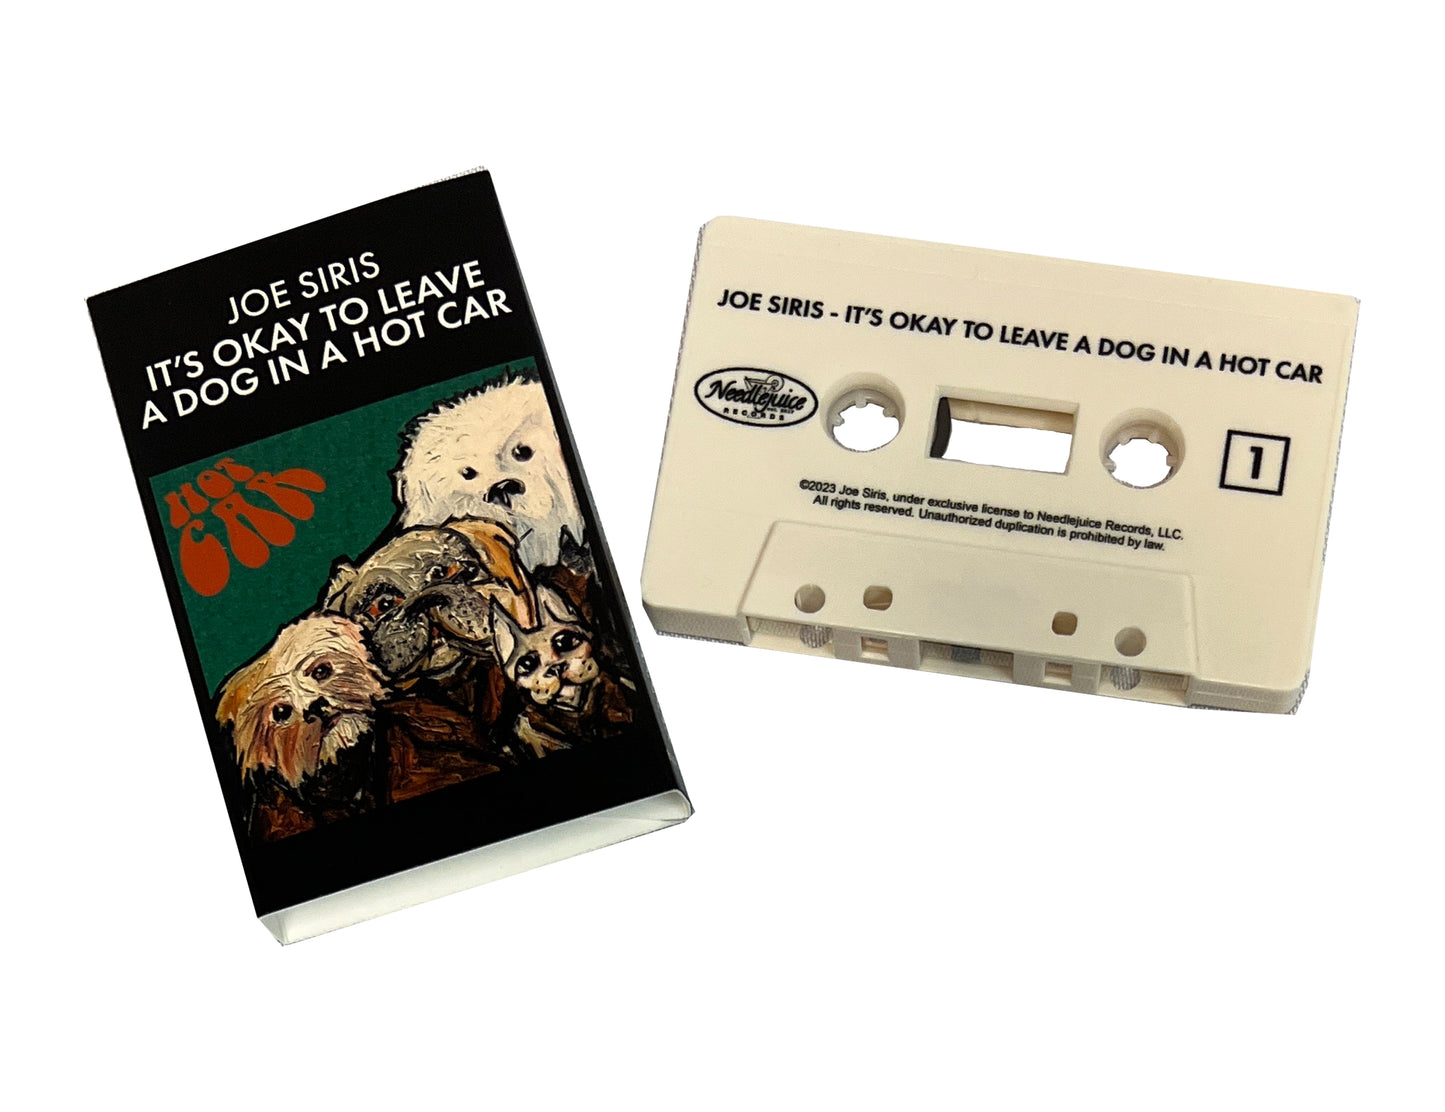 It's Okay to Leave a Dog in a Hot Car - Cassette Single